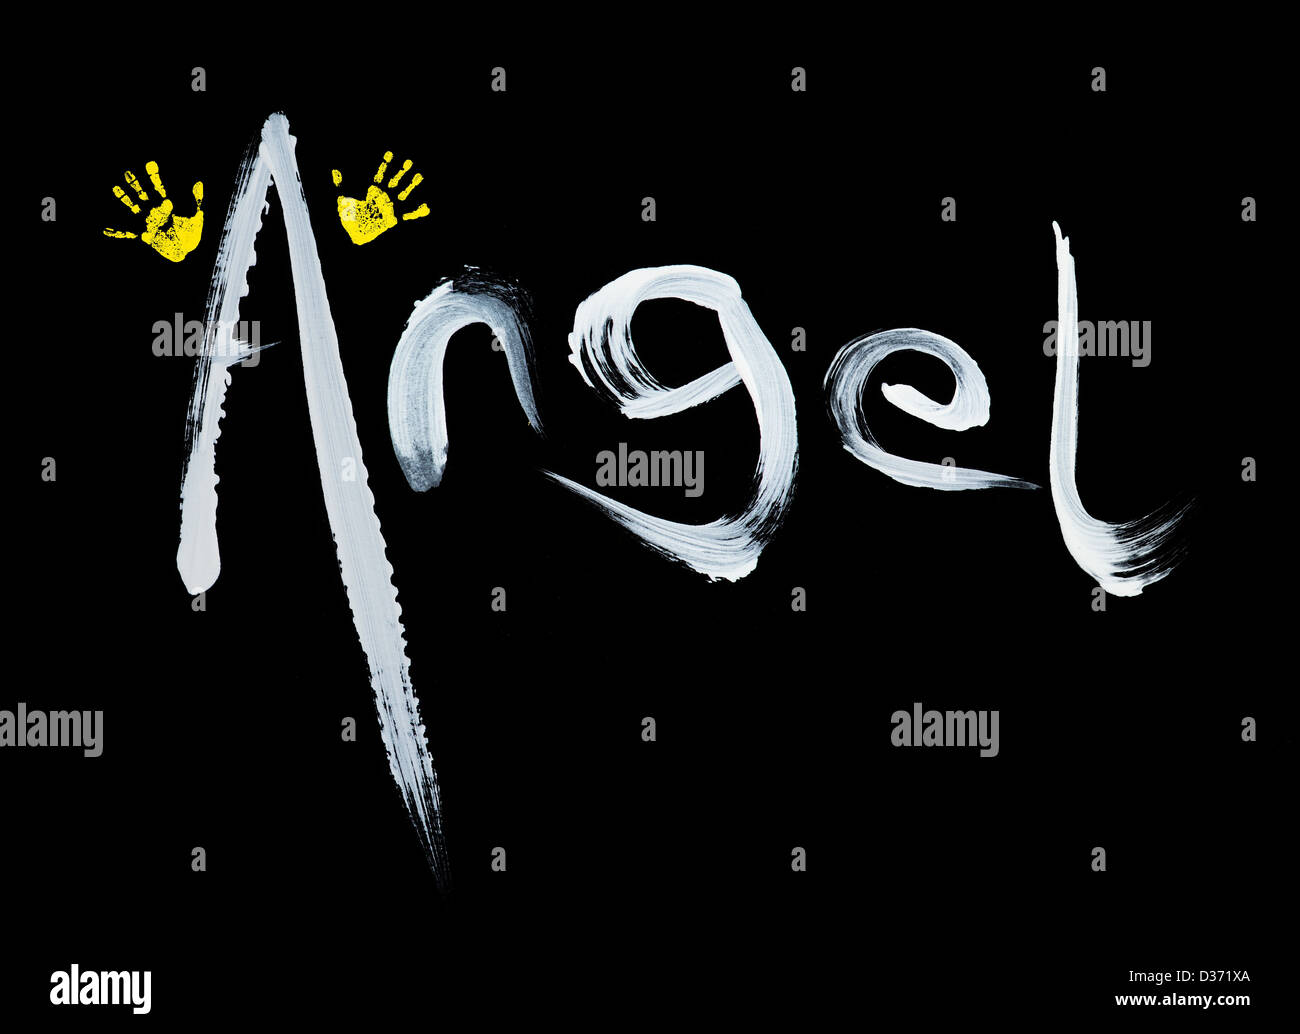 Painted Angel word with hand prints as wings on black background Stock Photo